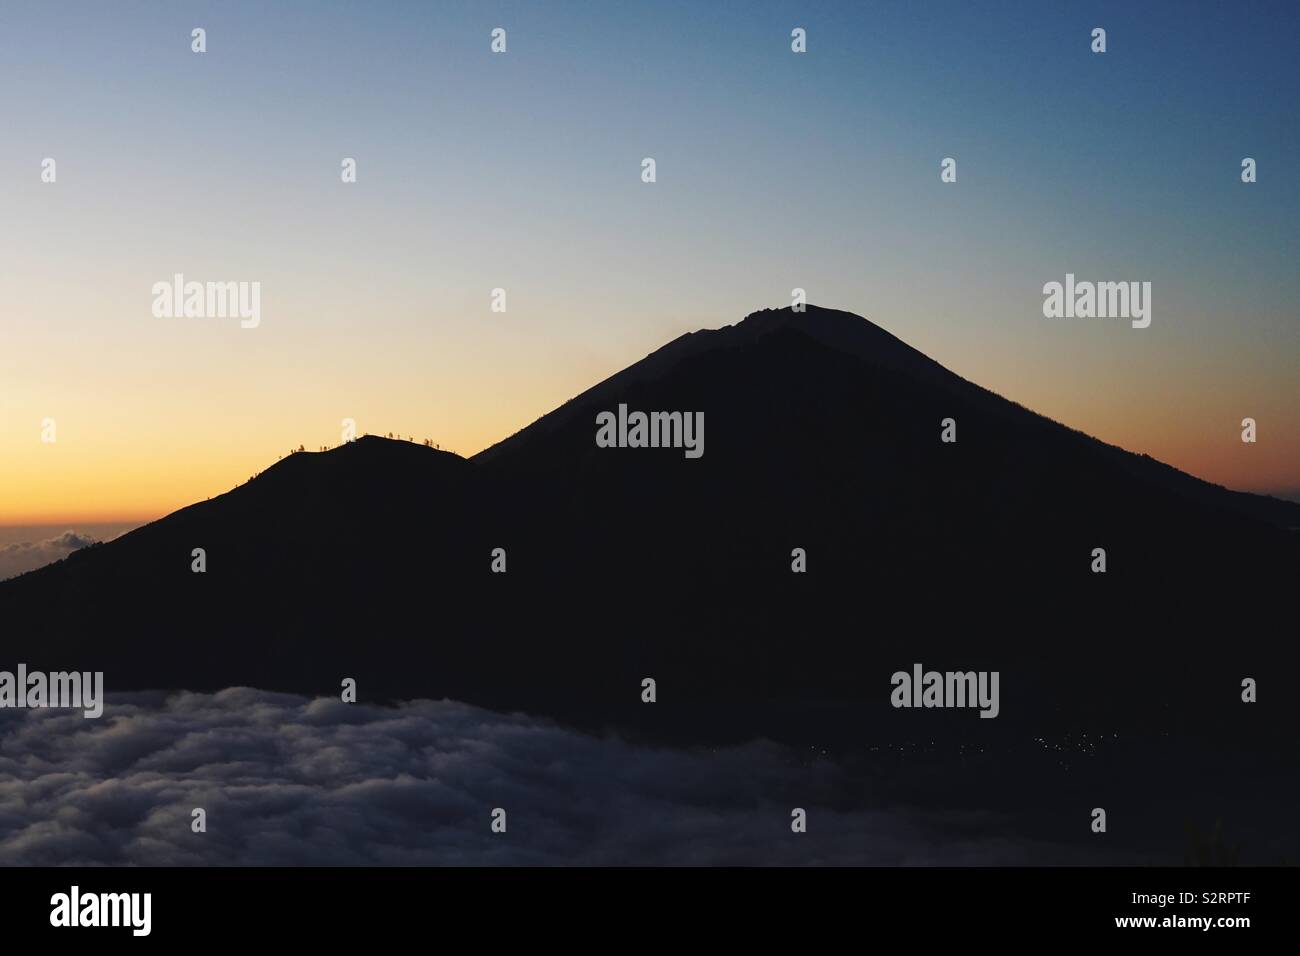 Silhouette of a large vulcano with two distinguished craters on the island of bali, indonesia, in the dawn, by sunrise. Stock Photo